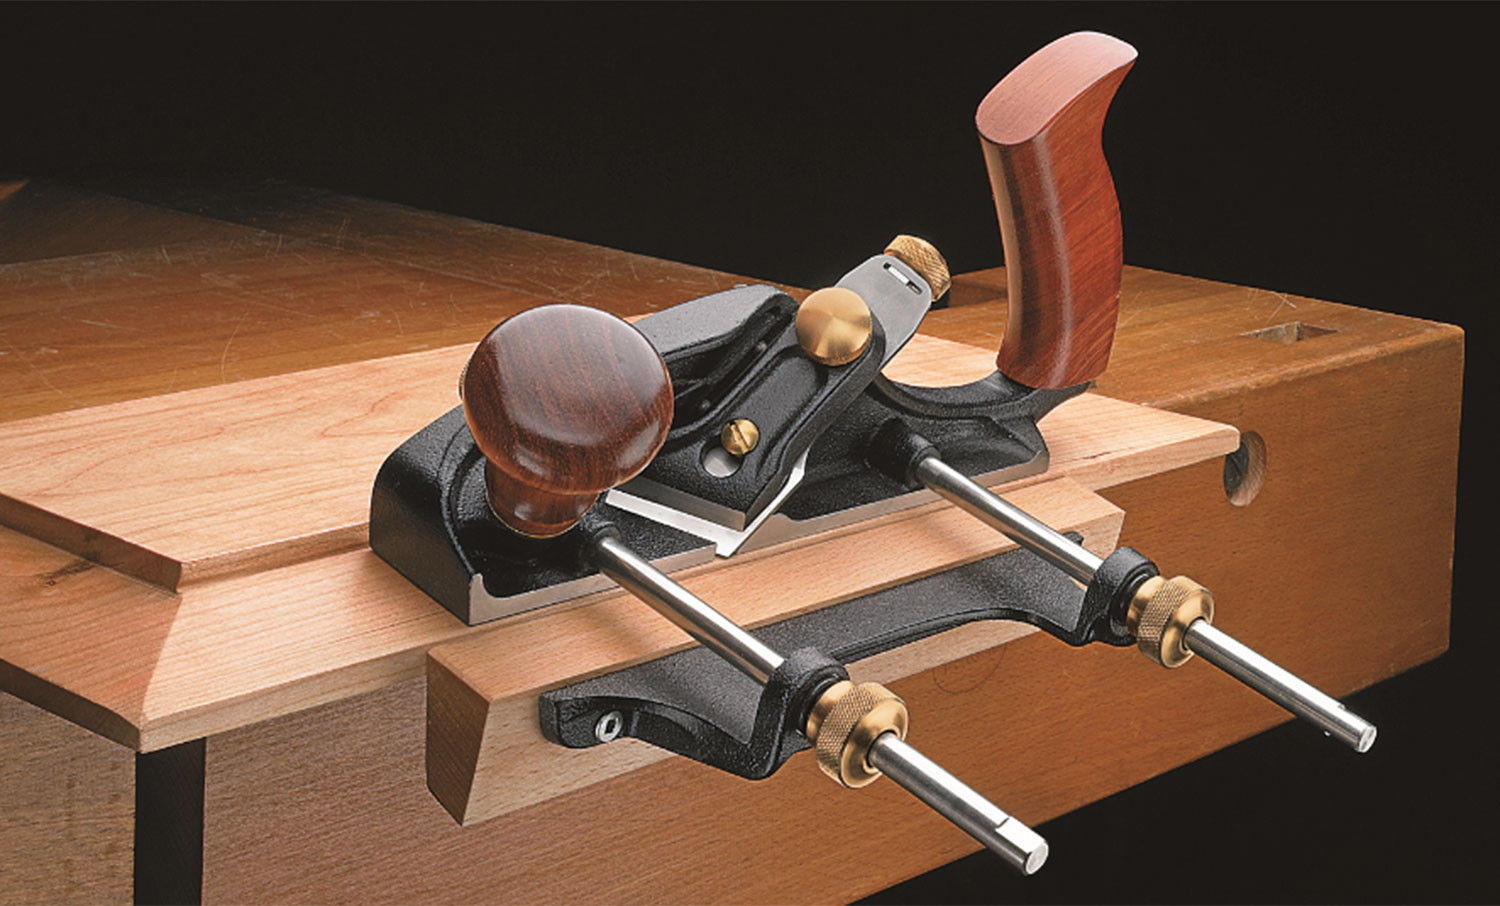 A Veritas skew rabbet plane with optional 6” rods and a user-made wooden fence extension installed.